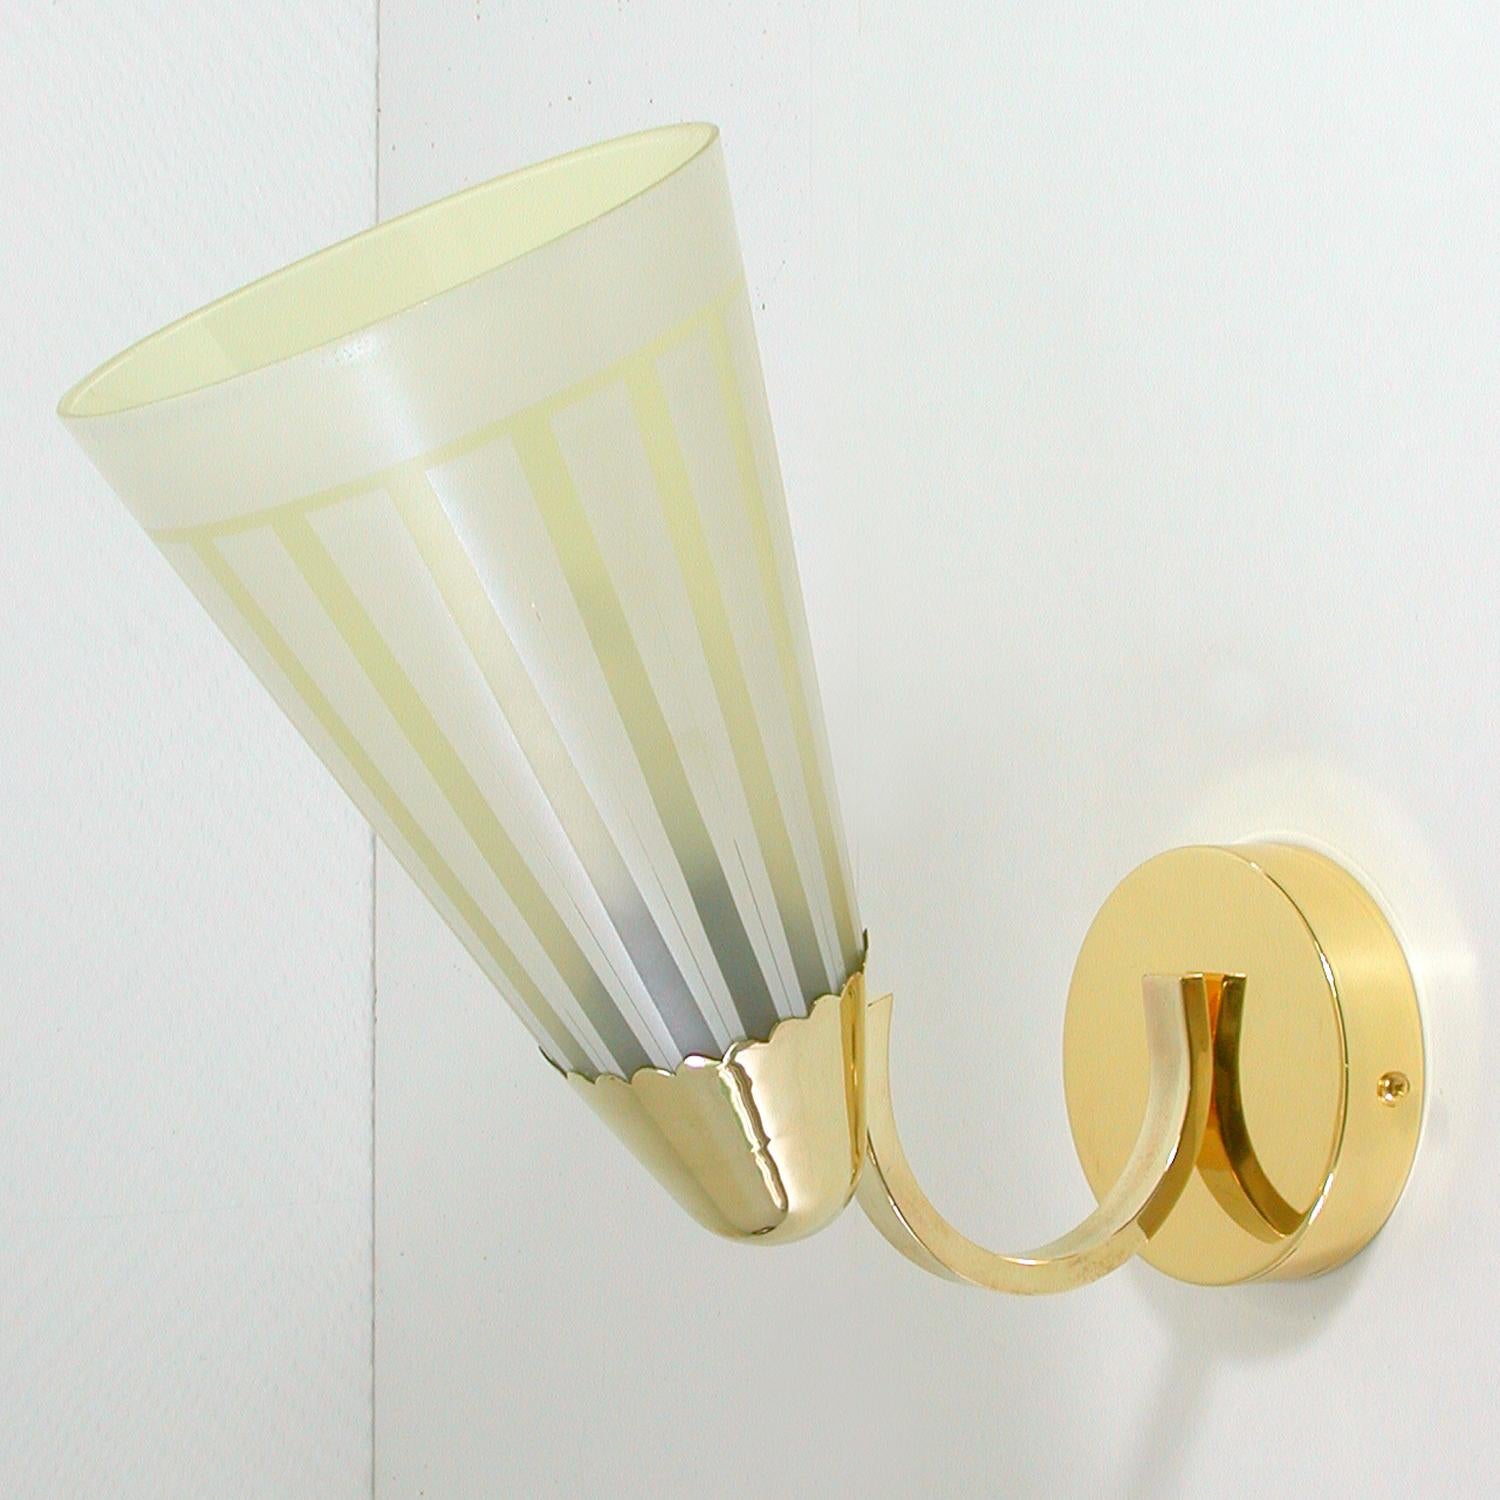 Midcentury German Brass and Glass Wall Light Sconce 1950s For Sale 3